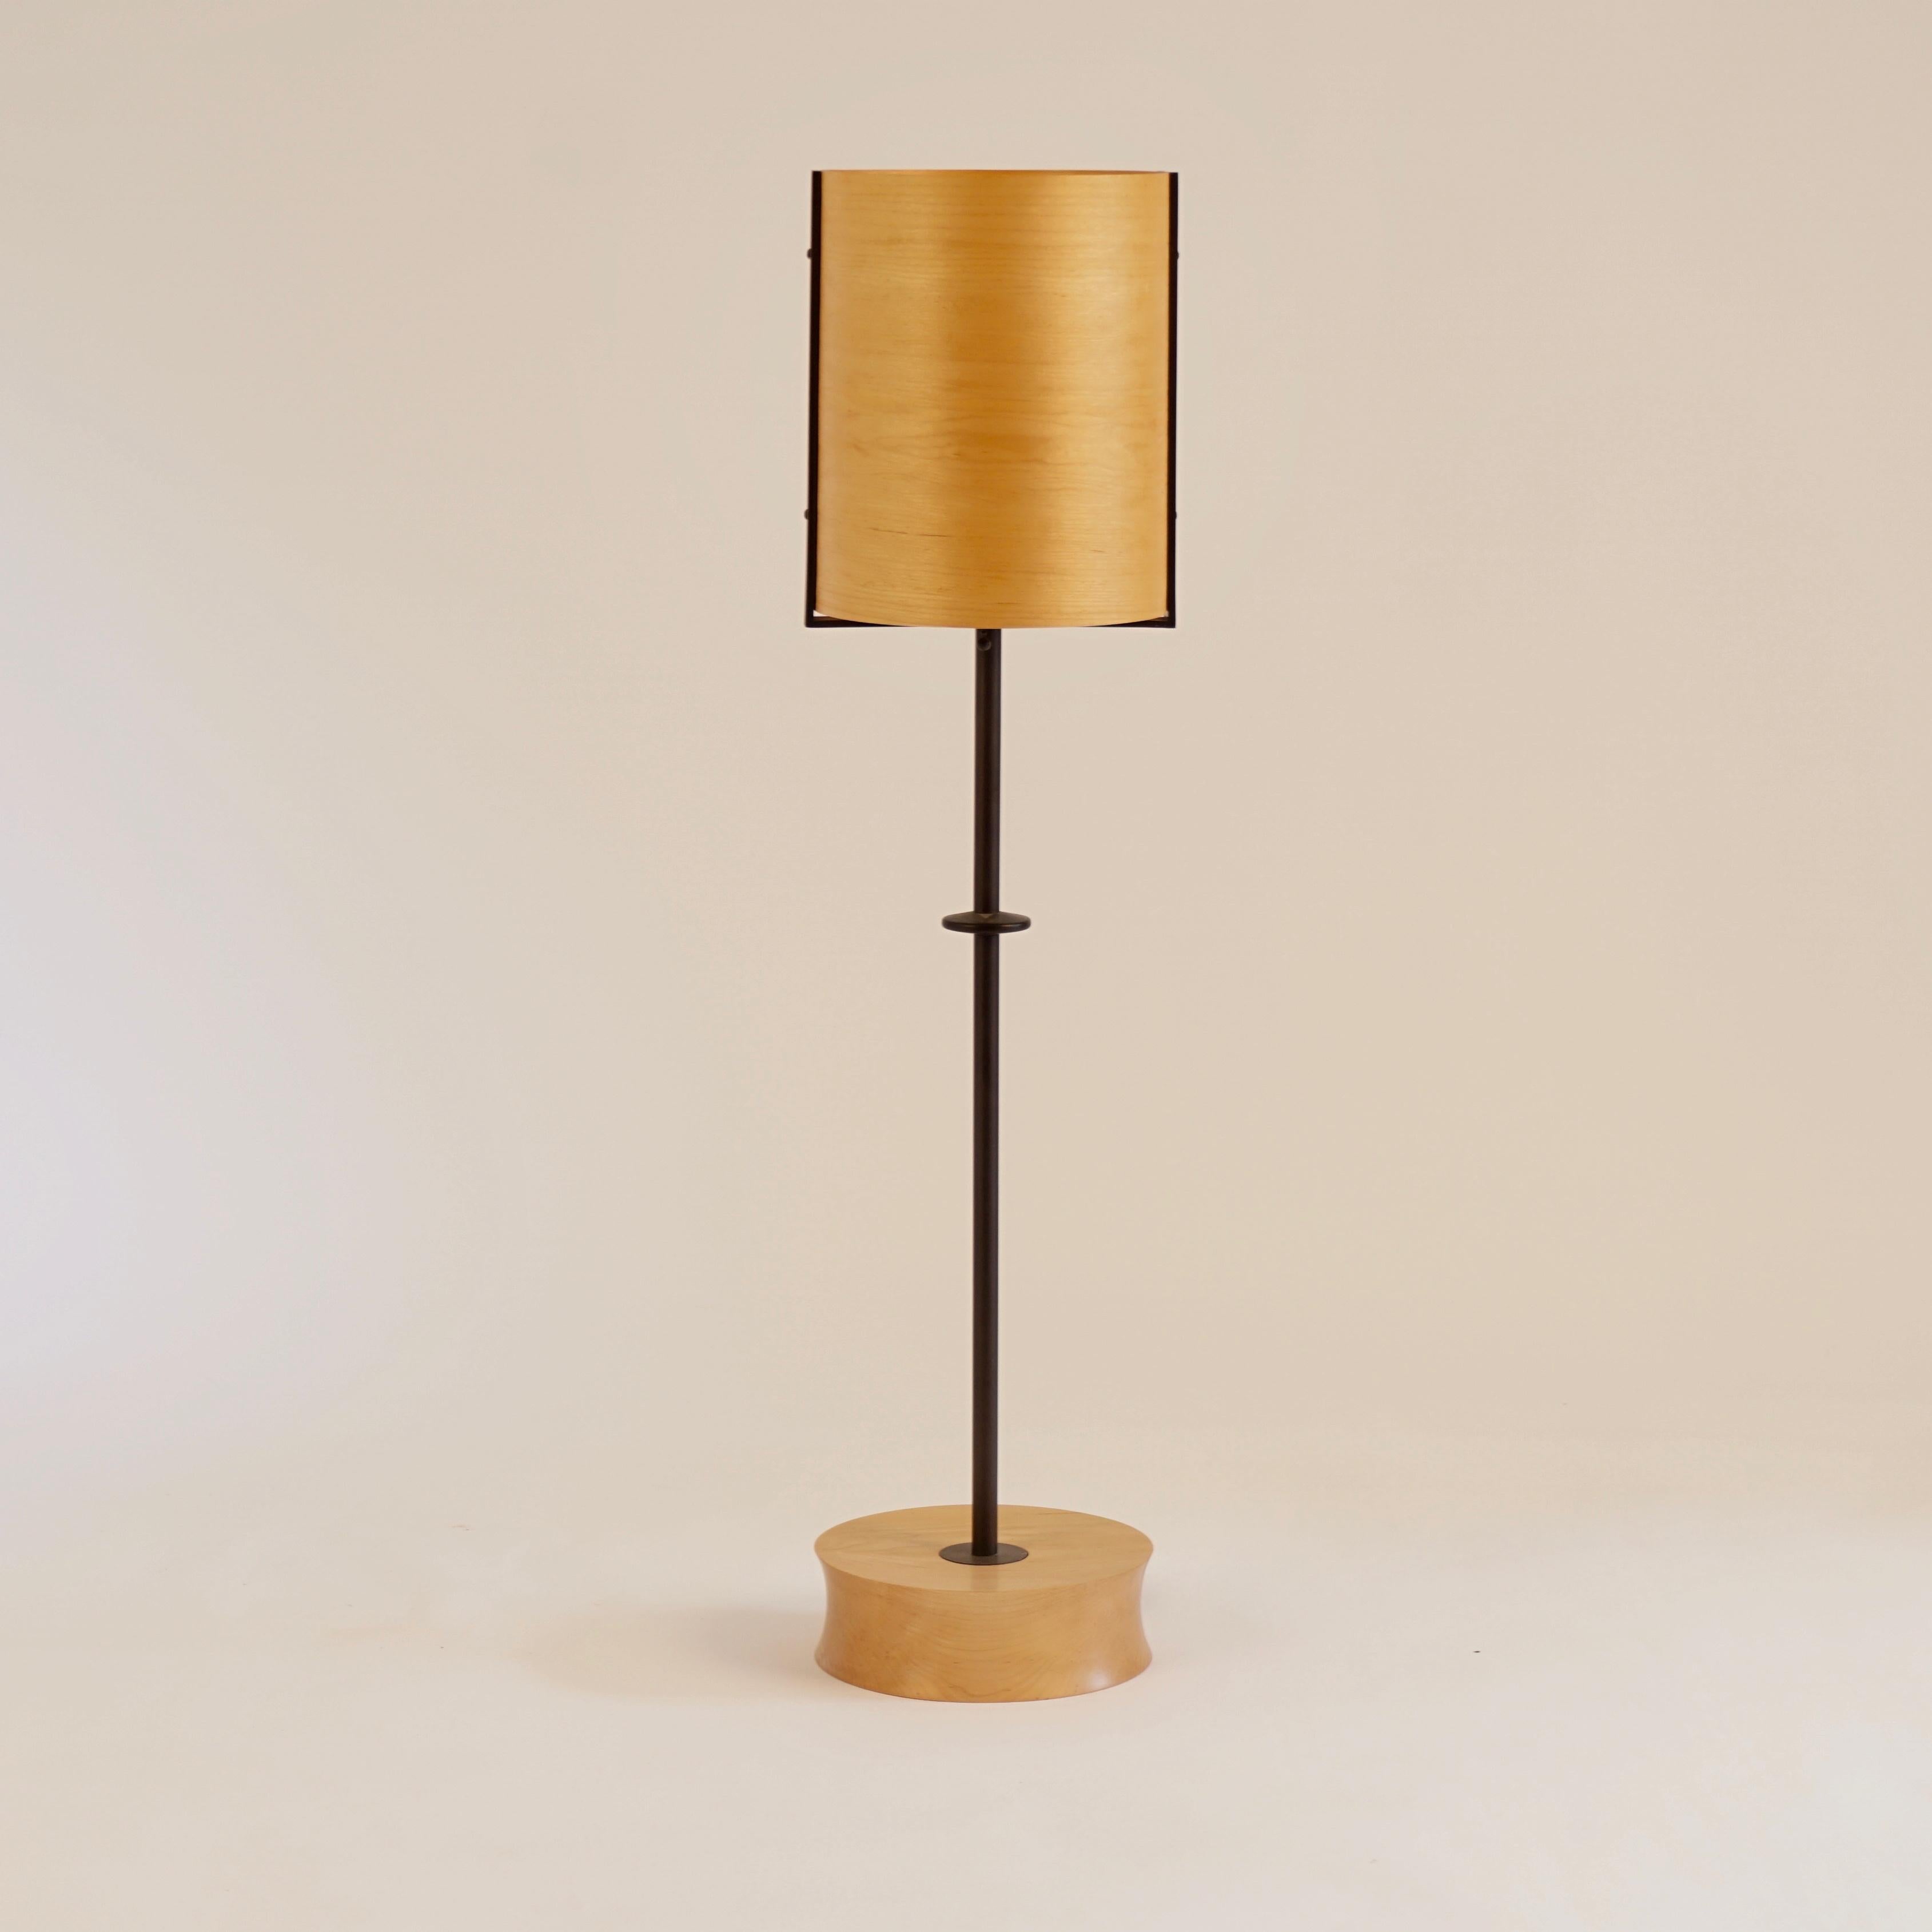 The maple veneer lamp #6 is part of the original Lehrecke Veneer Lighting Collection from 1998. The idea began with the beautiful way light passed through thin wood veneers, mostly local woods. The veneer has a nice golden color when off, and a very